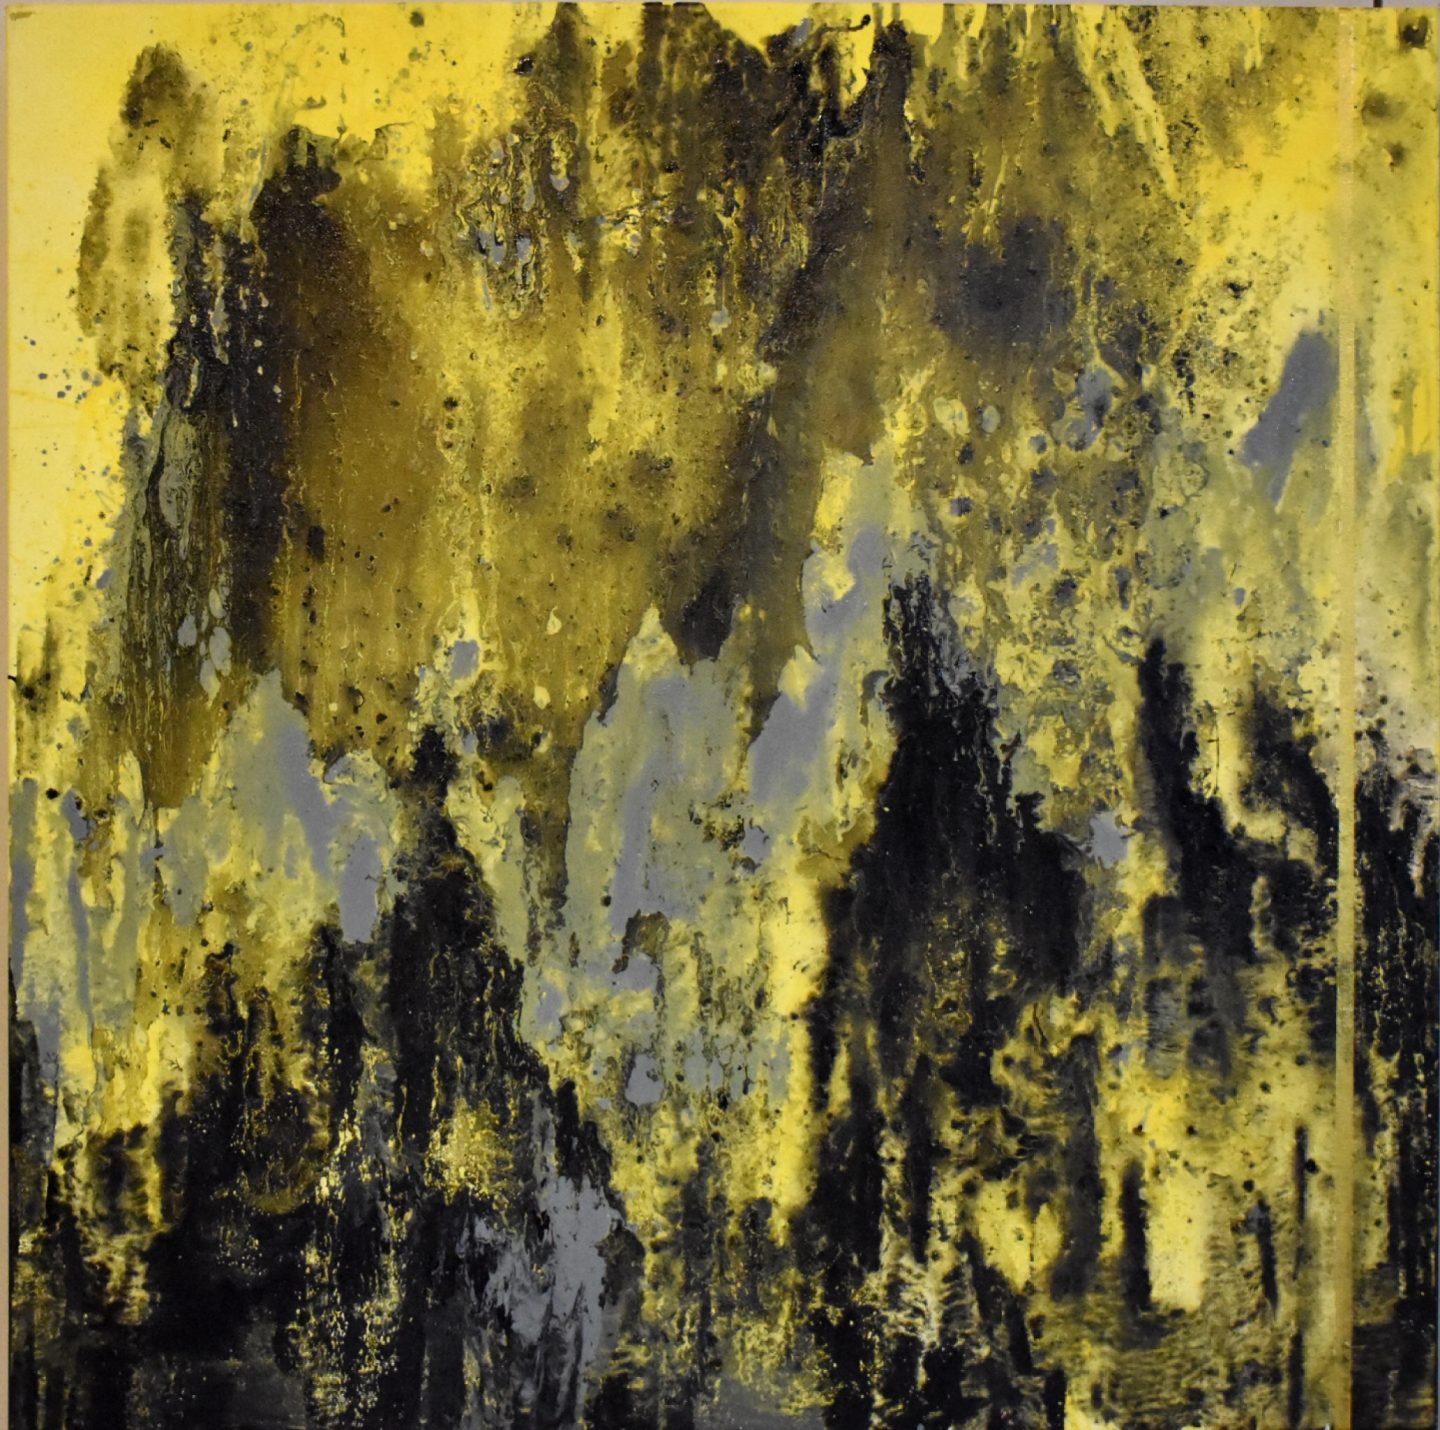 More Than Conquerors 2 is Inspired by Romans 8:37. The yellowish gold emerging from the morass of black reminds us that even in the darkest times, we are never far from God’s love. Courtesy of Jennifer Tan